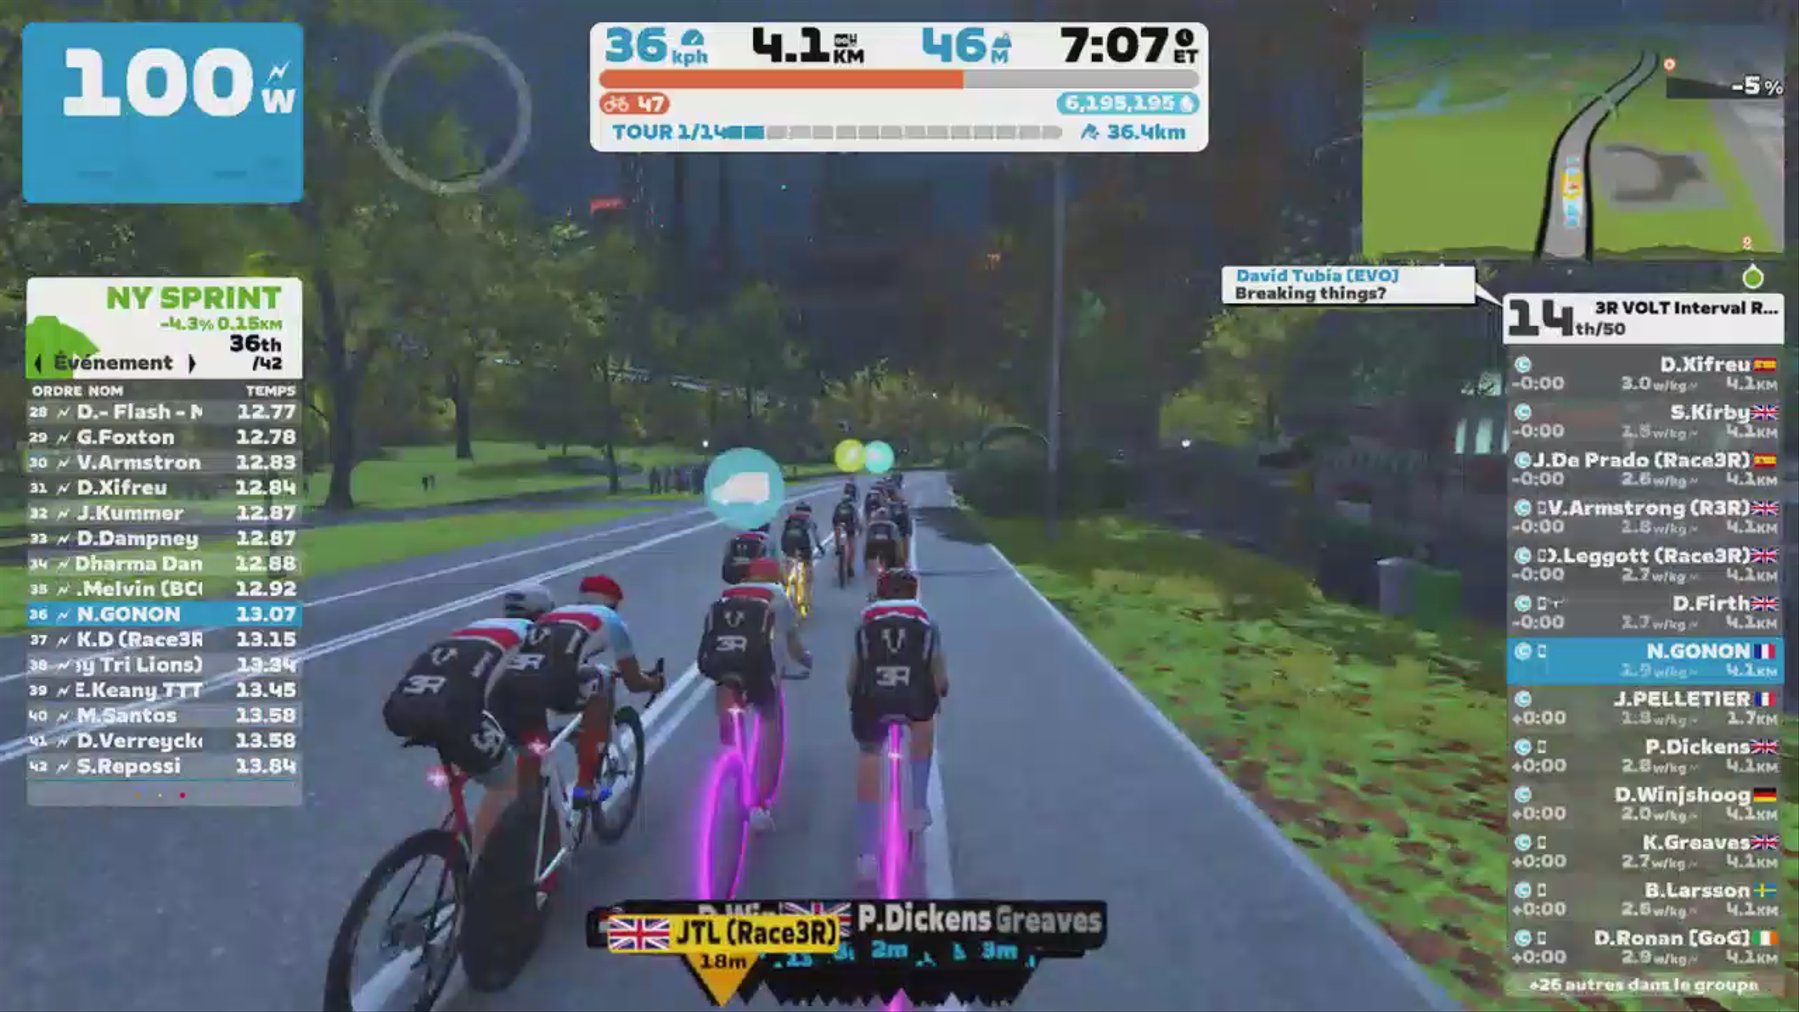 Zwift - Group Ride: 3R VOLT Interval Ride [~2.6-3.2 w/kg avg] (C) on LaGuardia Loop in New York